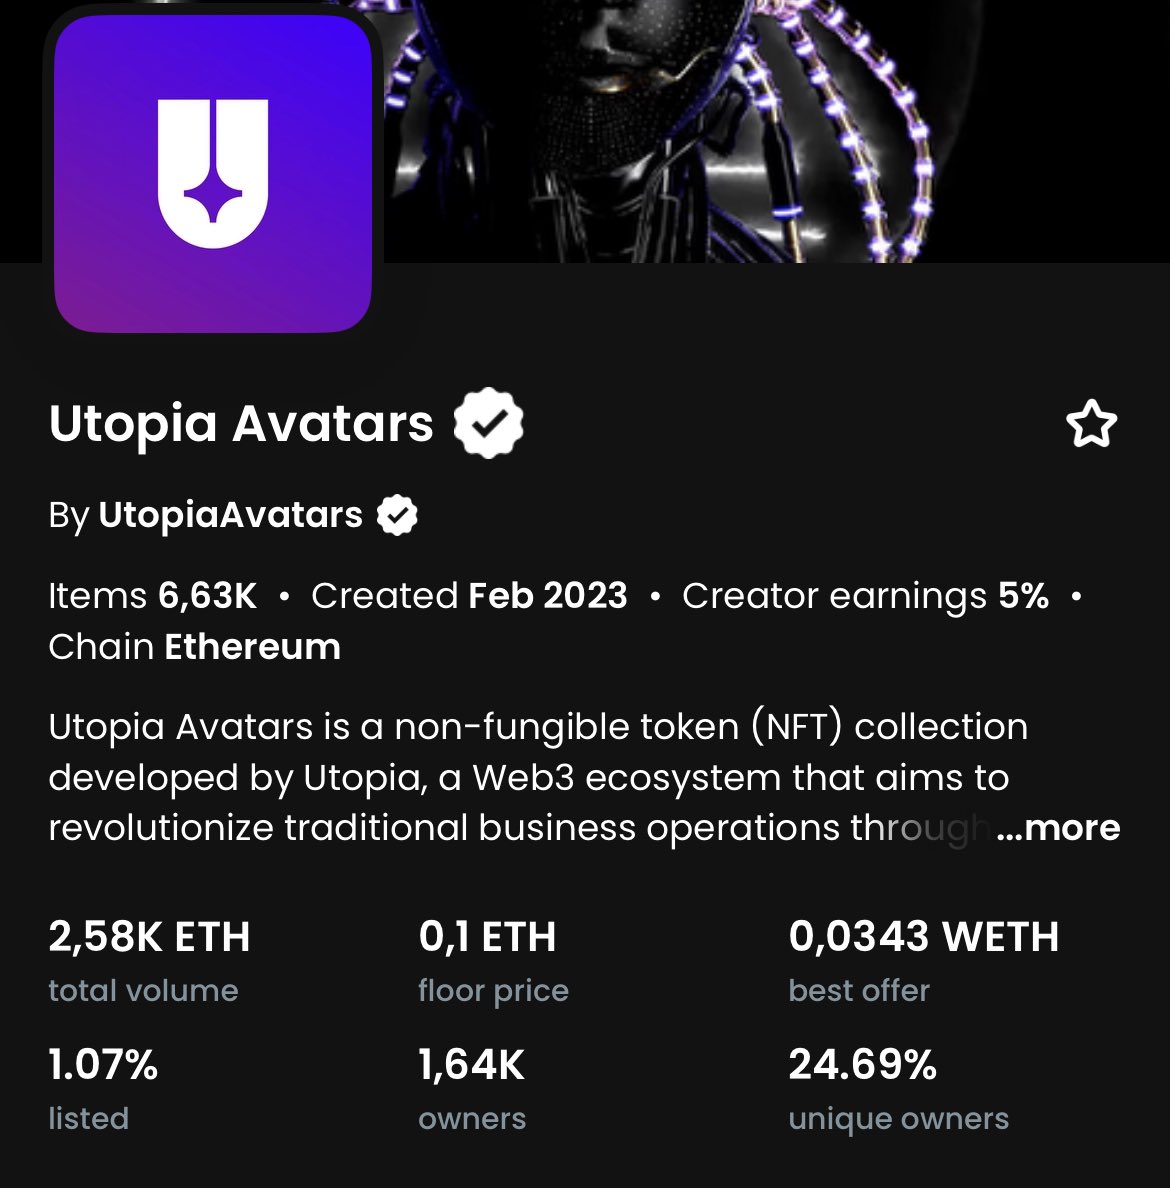 @UtopiaAvatars just hit the 0.1 ETH milestone! 🚀 What are your thoughts on this? 💬💎